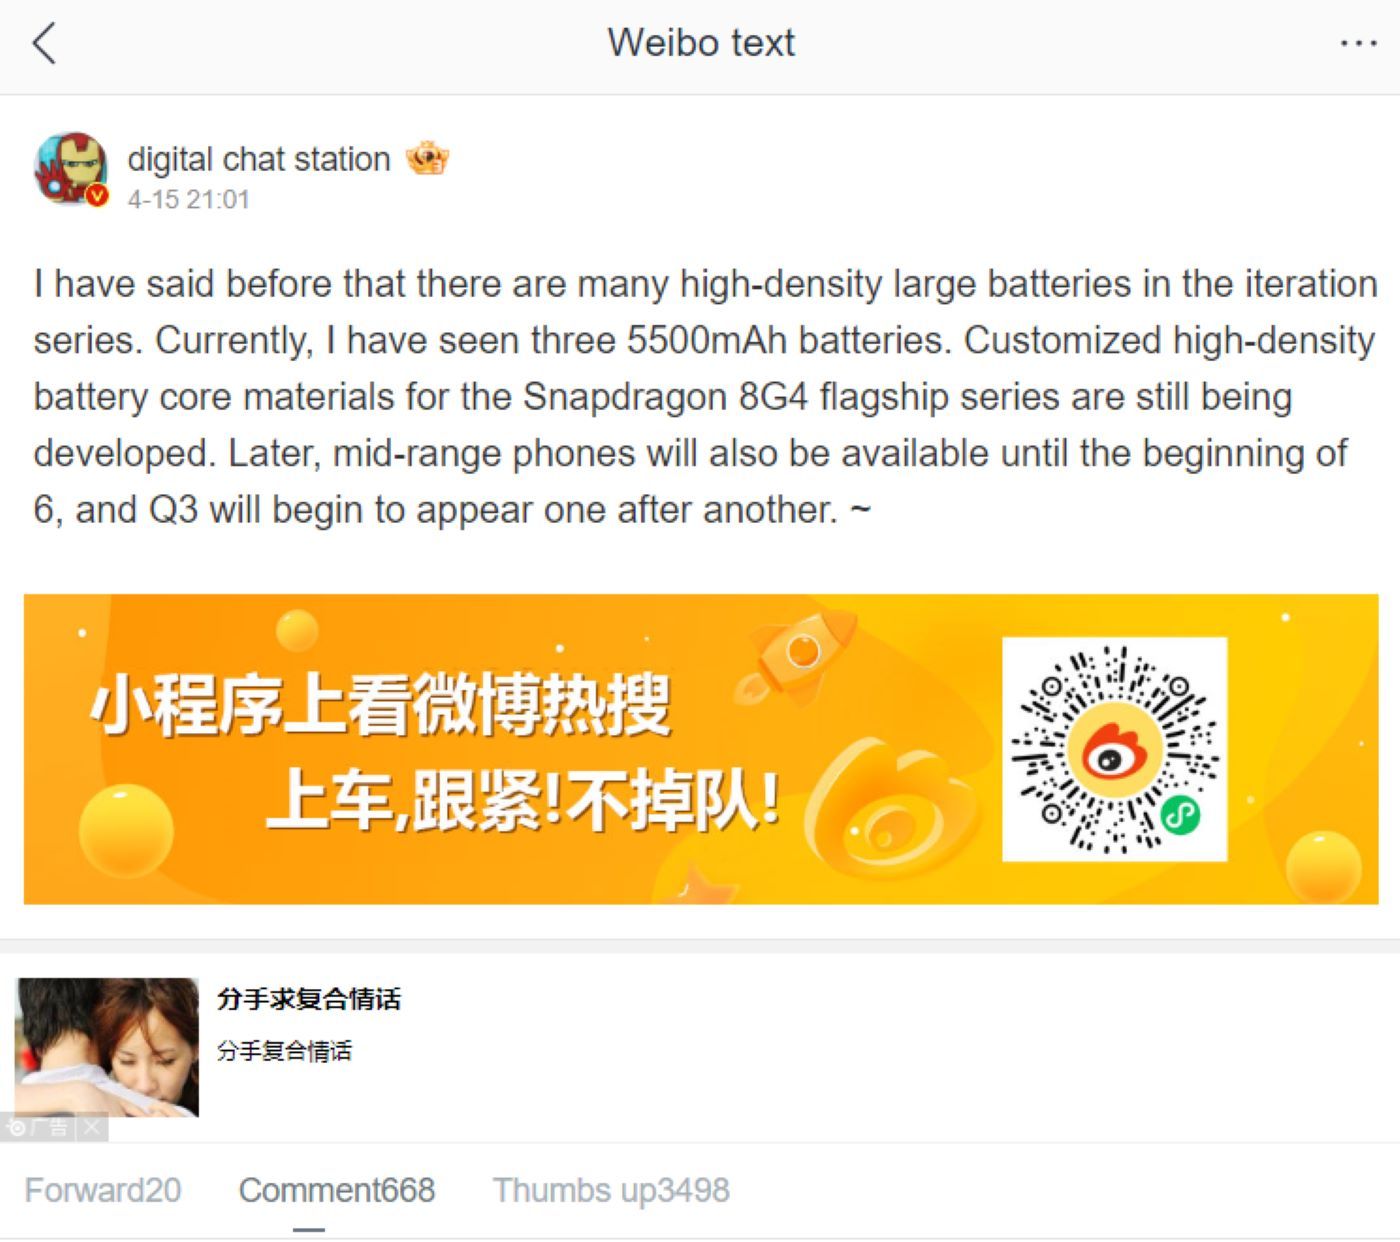 A screenshot of the Digital Chat Station post on Weibo